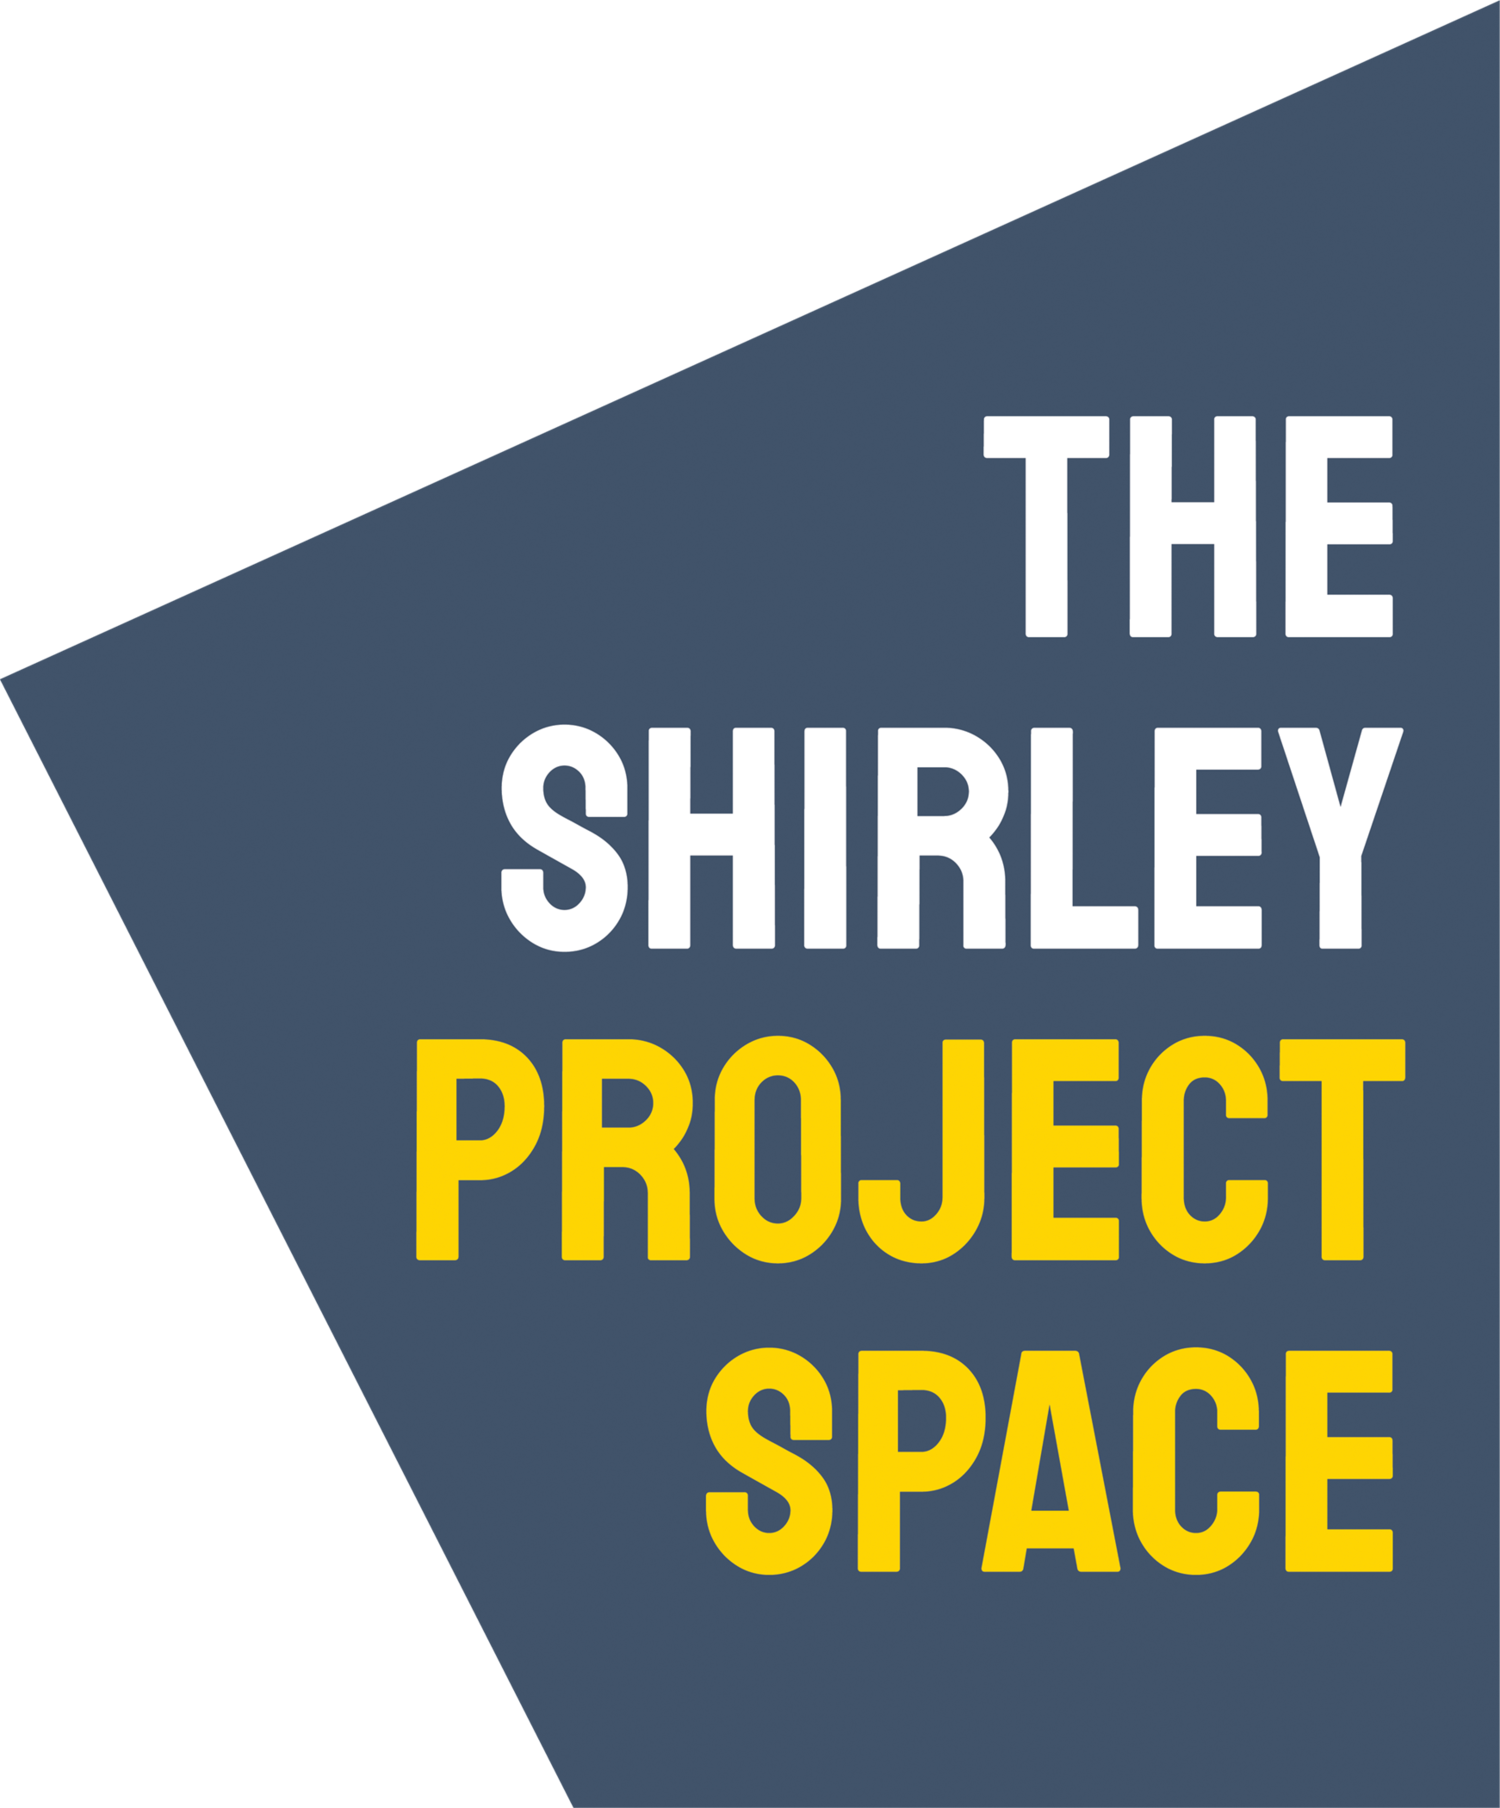 The Shirley Project Space